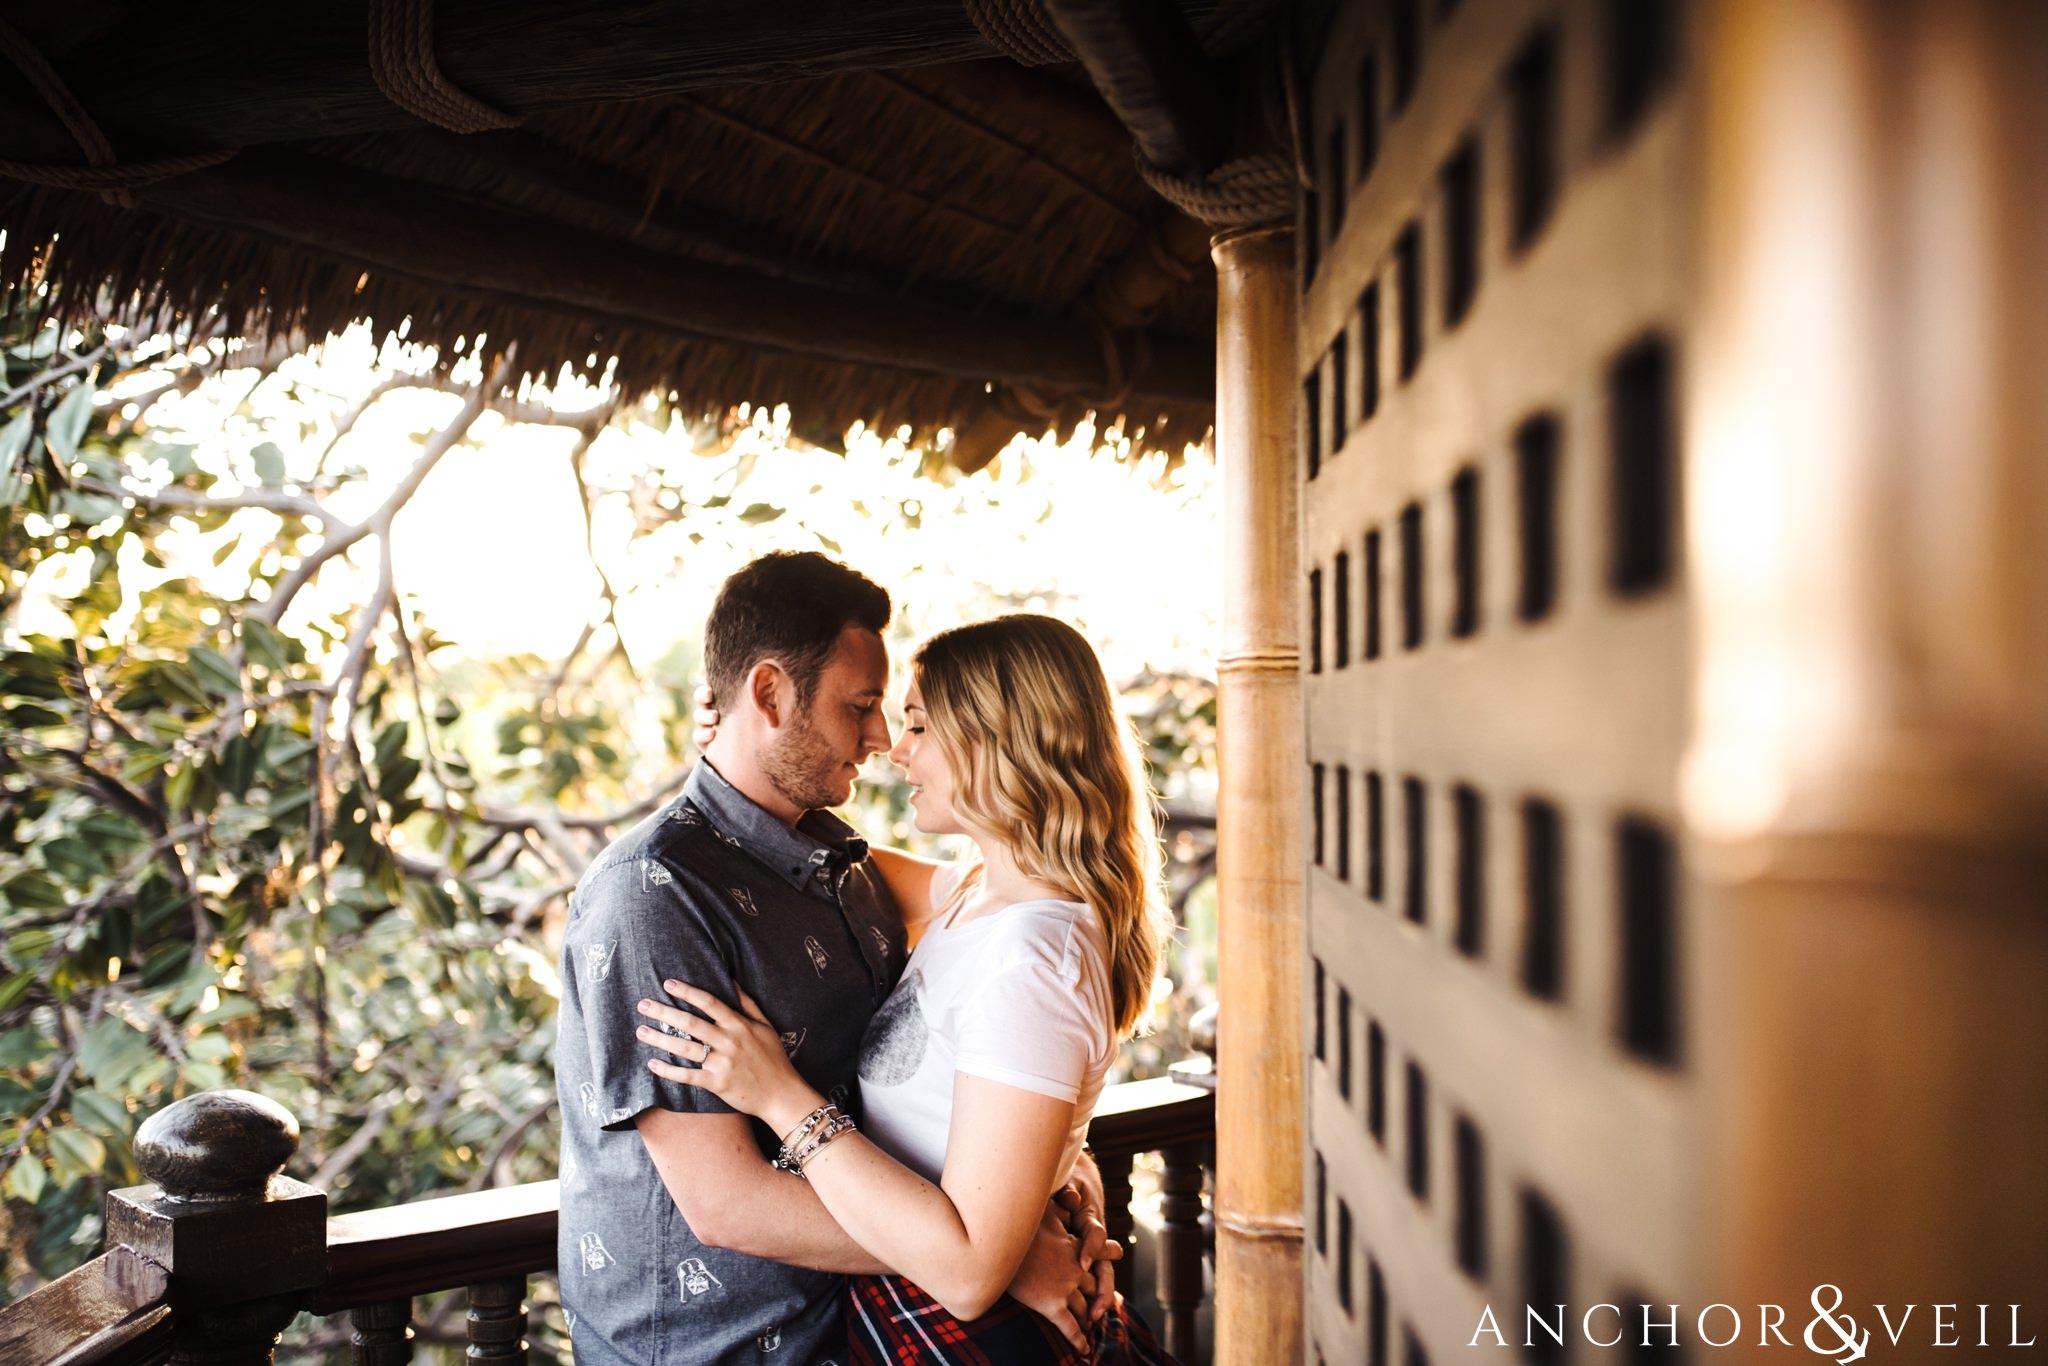 getting close in the robinson crusoe tree house during their Disney world engagement session at Disney's Magic Kingdom